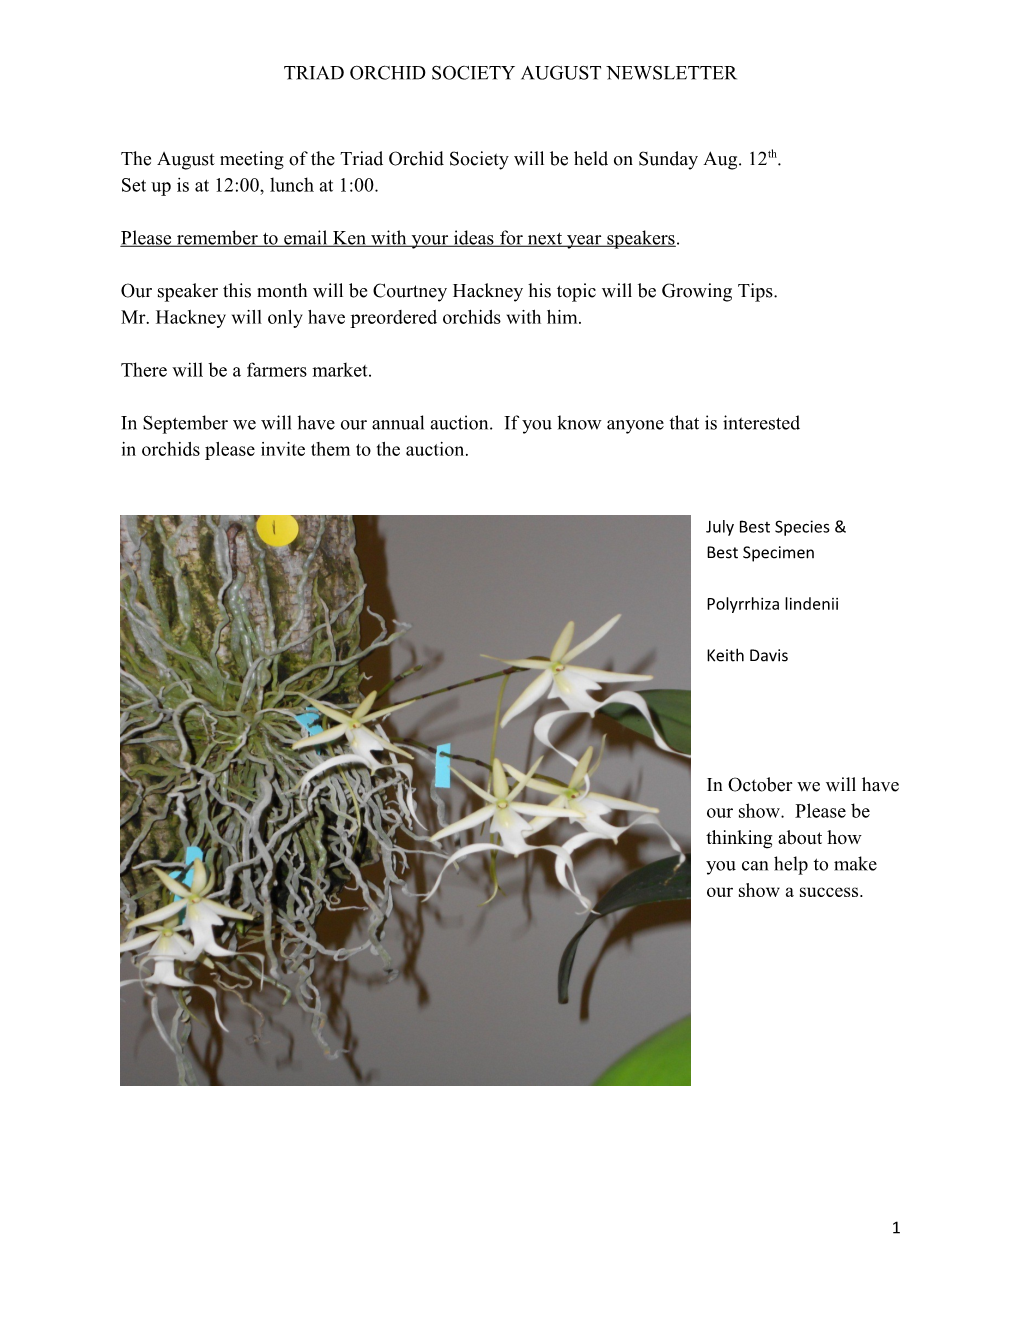 The August Meeting of the Triad Orchid Society Will Be Held on Sunday Aug